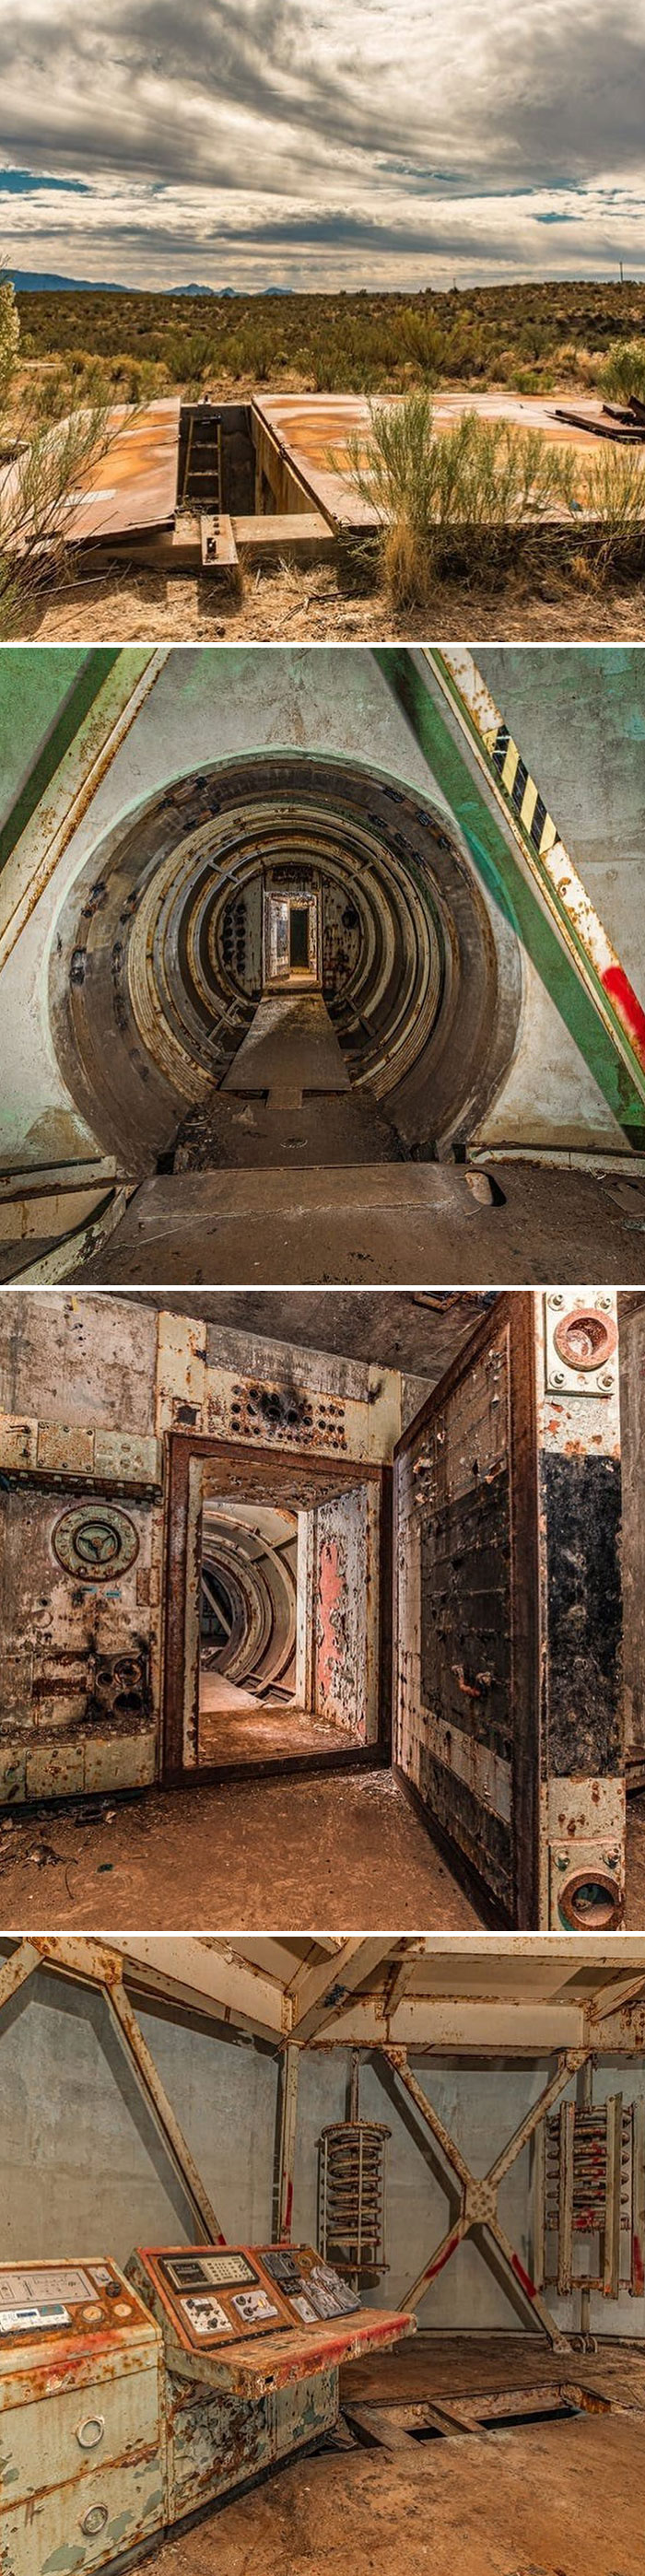 This One Is More Peculiar Than Usual: $495,000/14.73 Acres And An Underground Missile Complex “One Of America's Most Top Secret Places Is Now On The Market